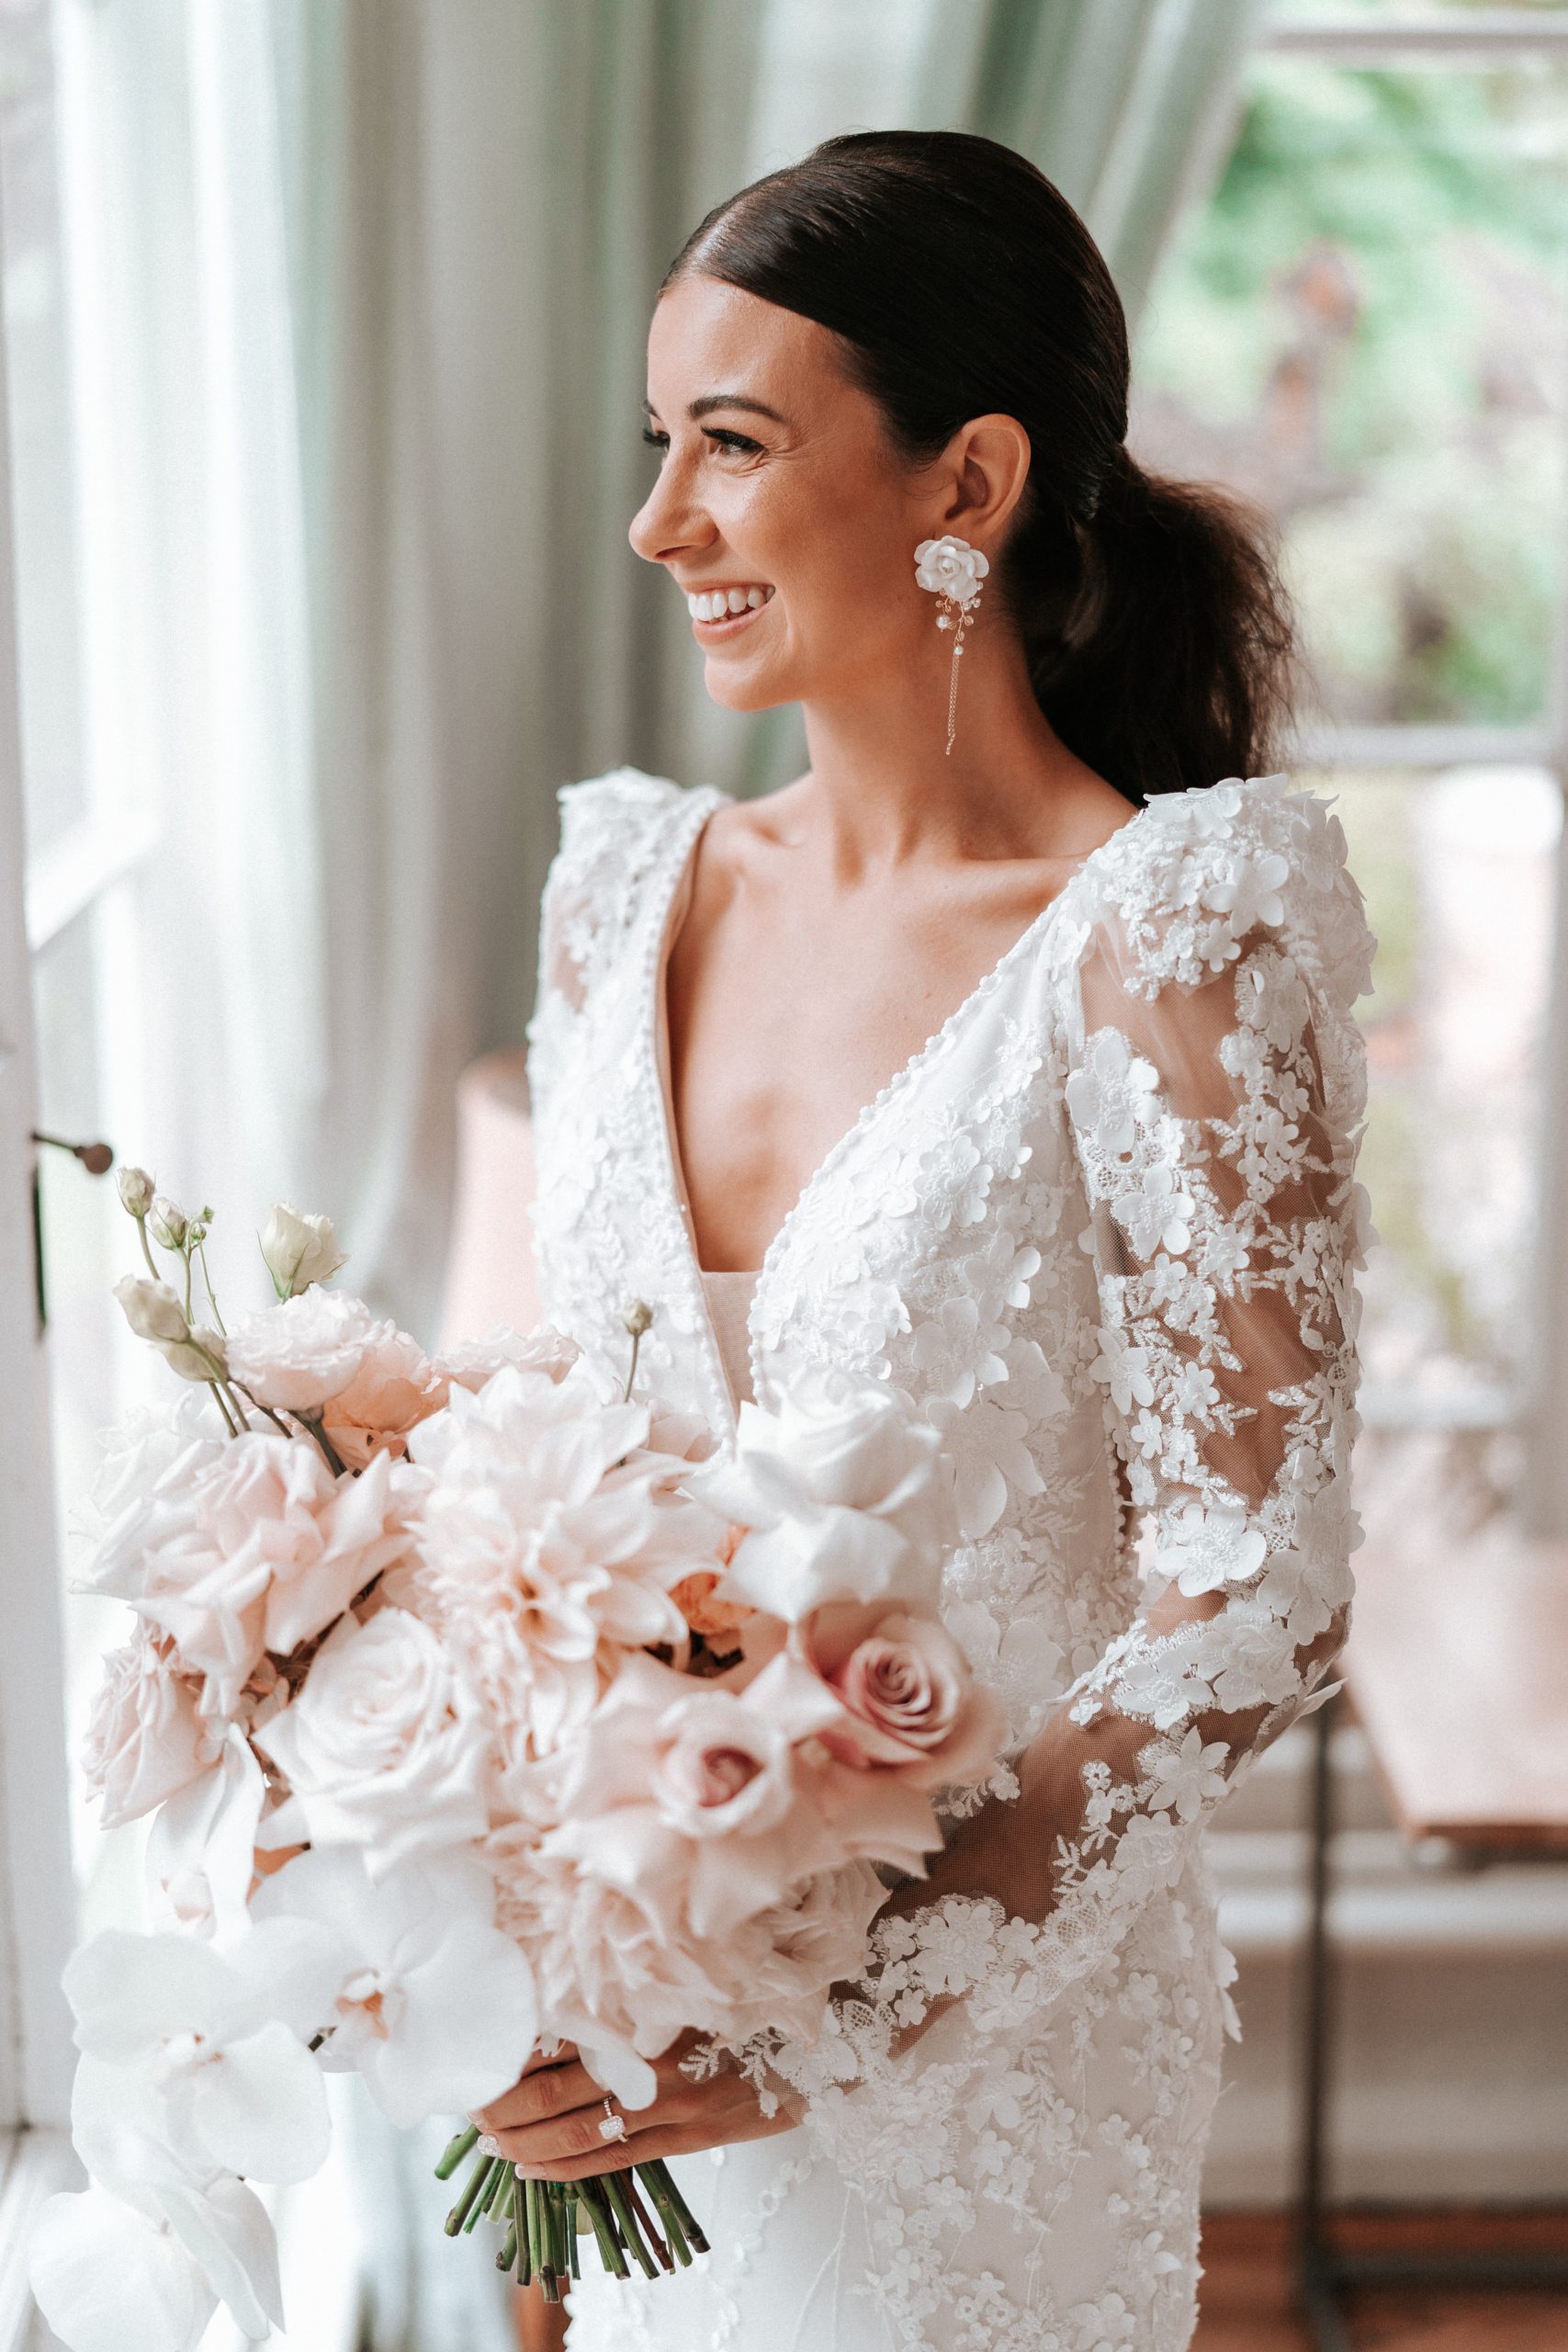 Bride Wearing A Long Sleeve Romantic Summer Wedding Dress Called Cruz By Sottero And Midgley With Pink Florals